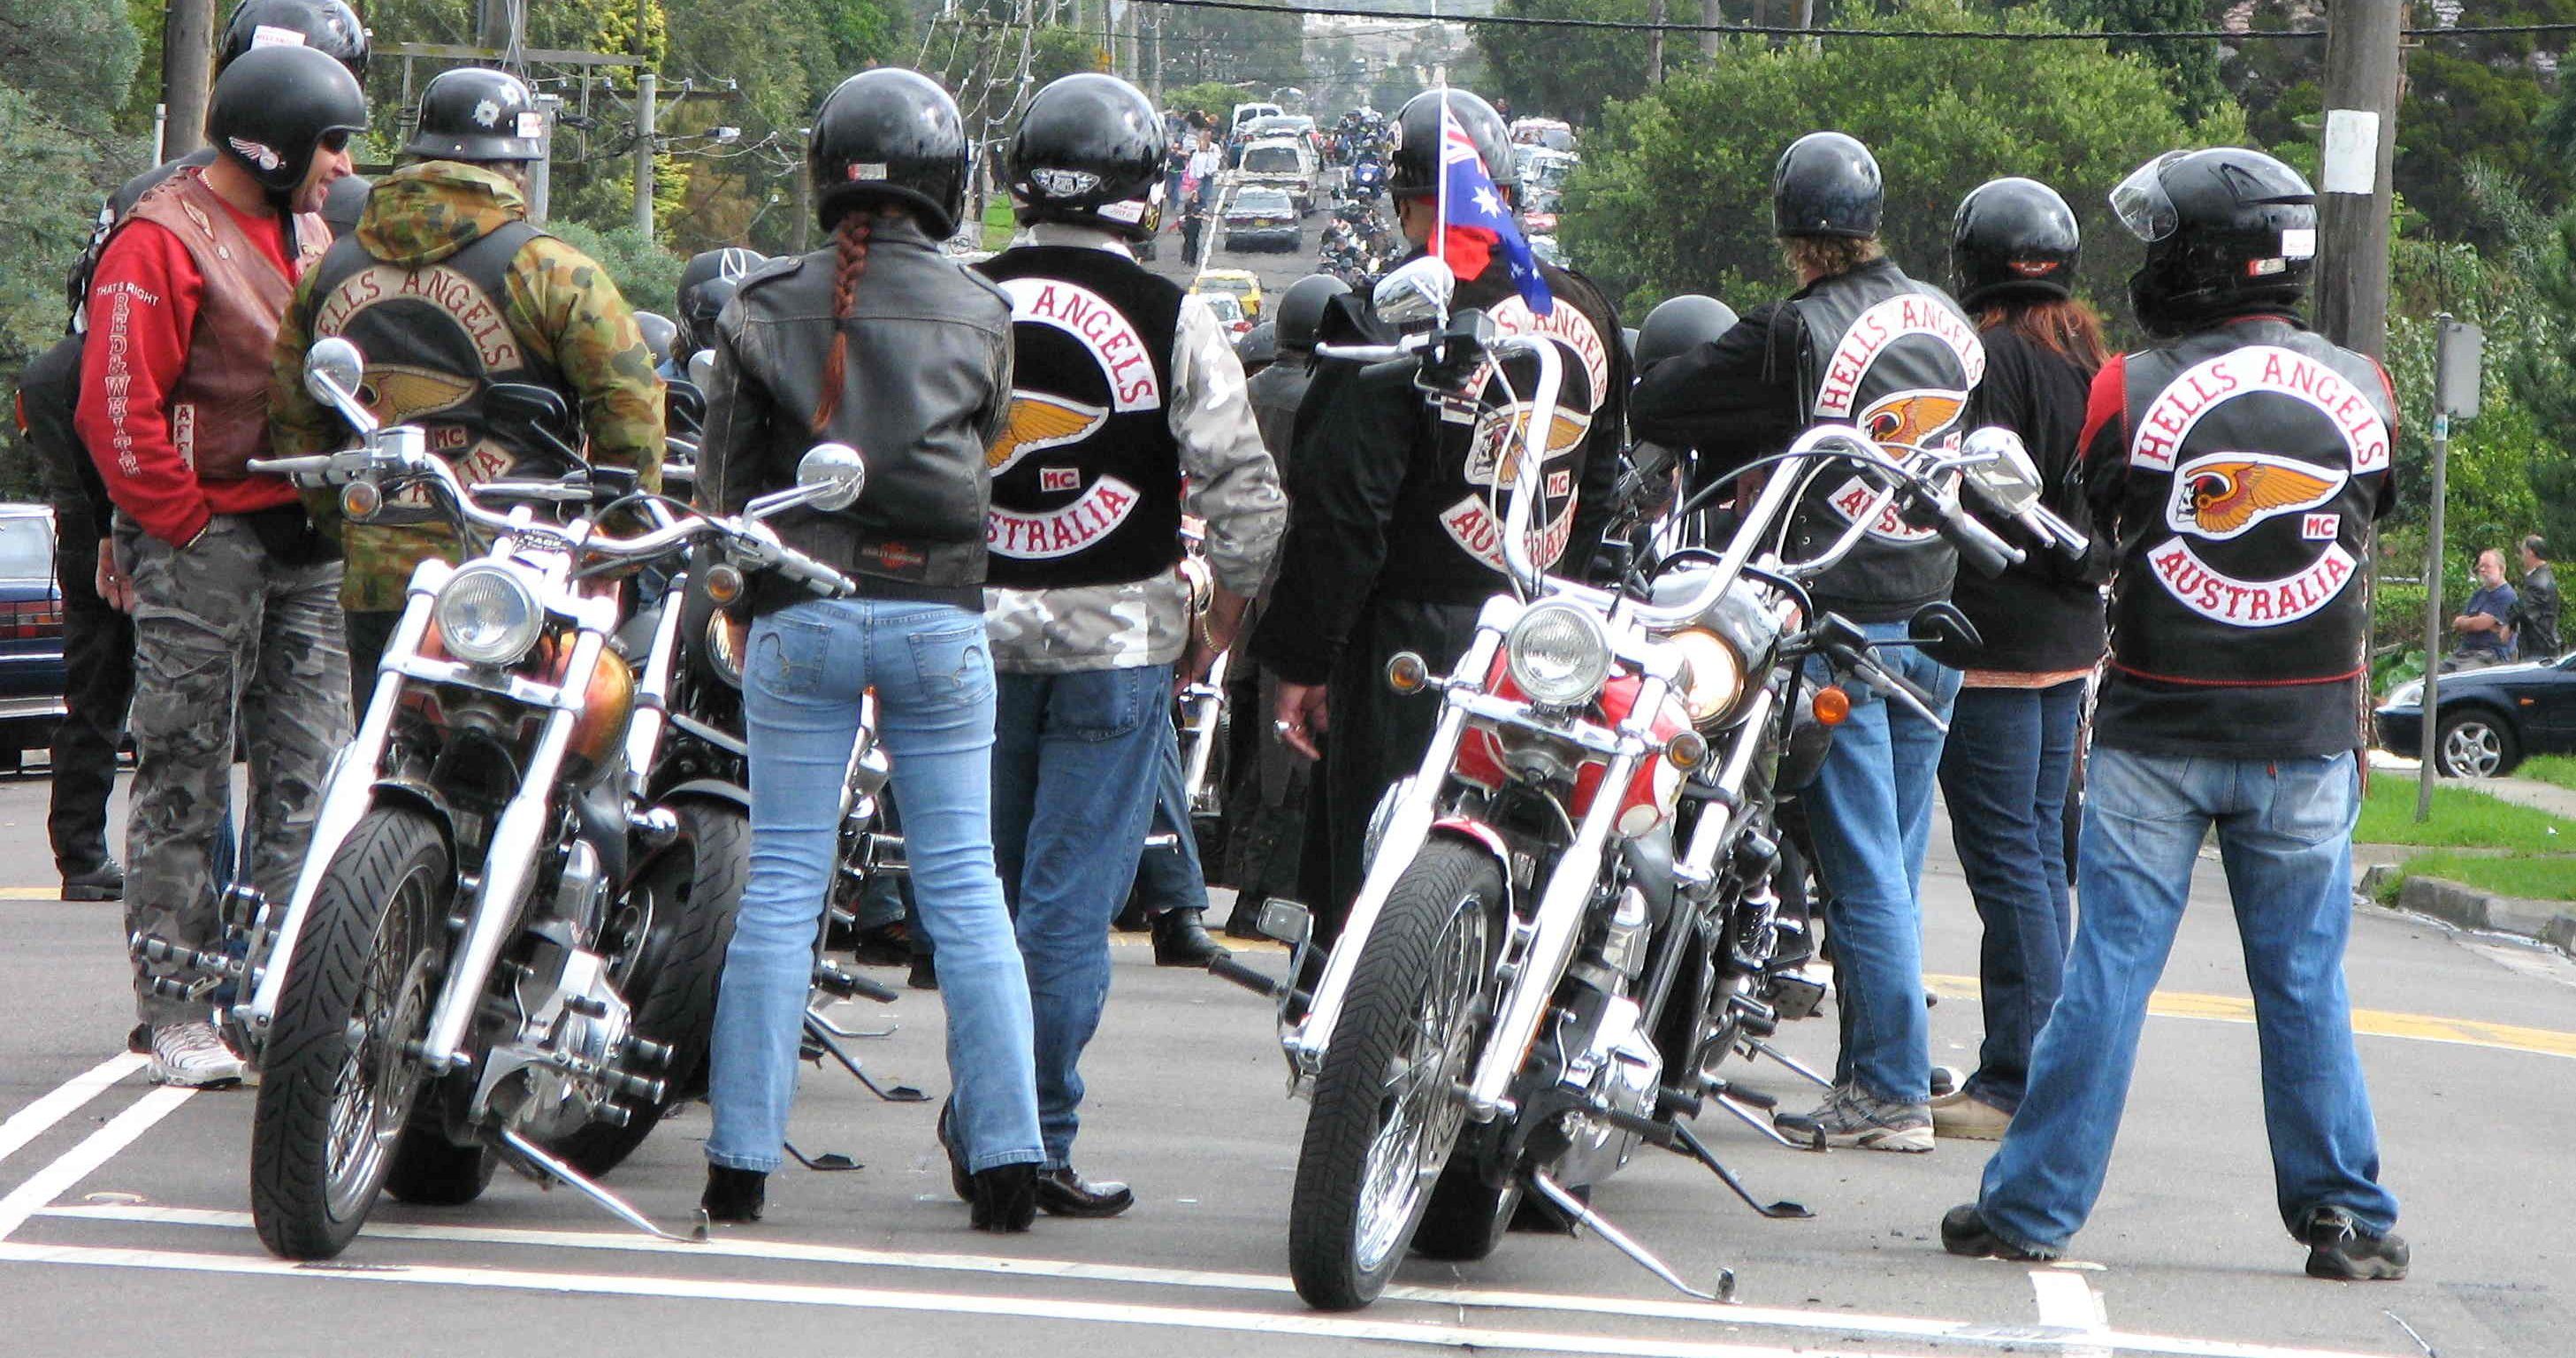 10 Facts About The Hells Angels That Make Us Want To Ride With Them